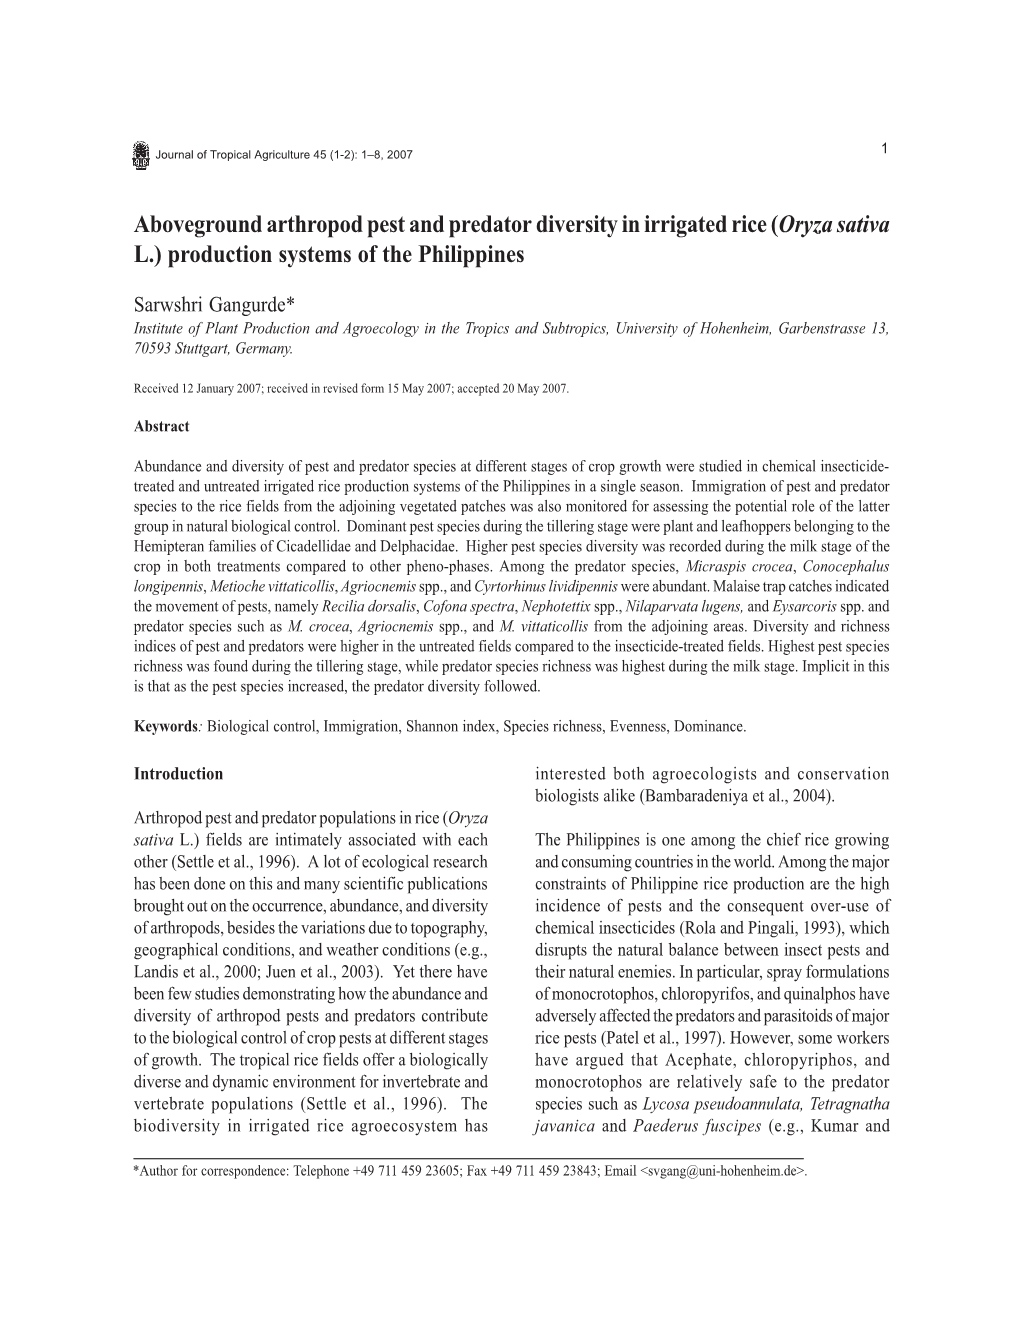 Aboveground Arthropod Pest and Predator Diversity in Irrigated Rice (Oryza Sativa L.) Production Systems of the Philippines